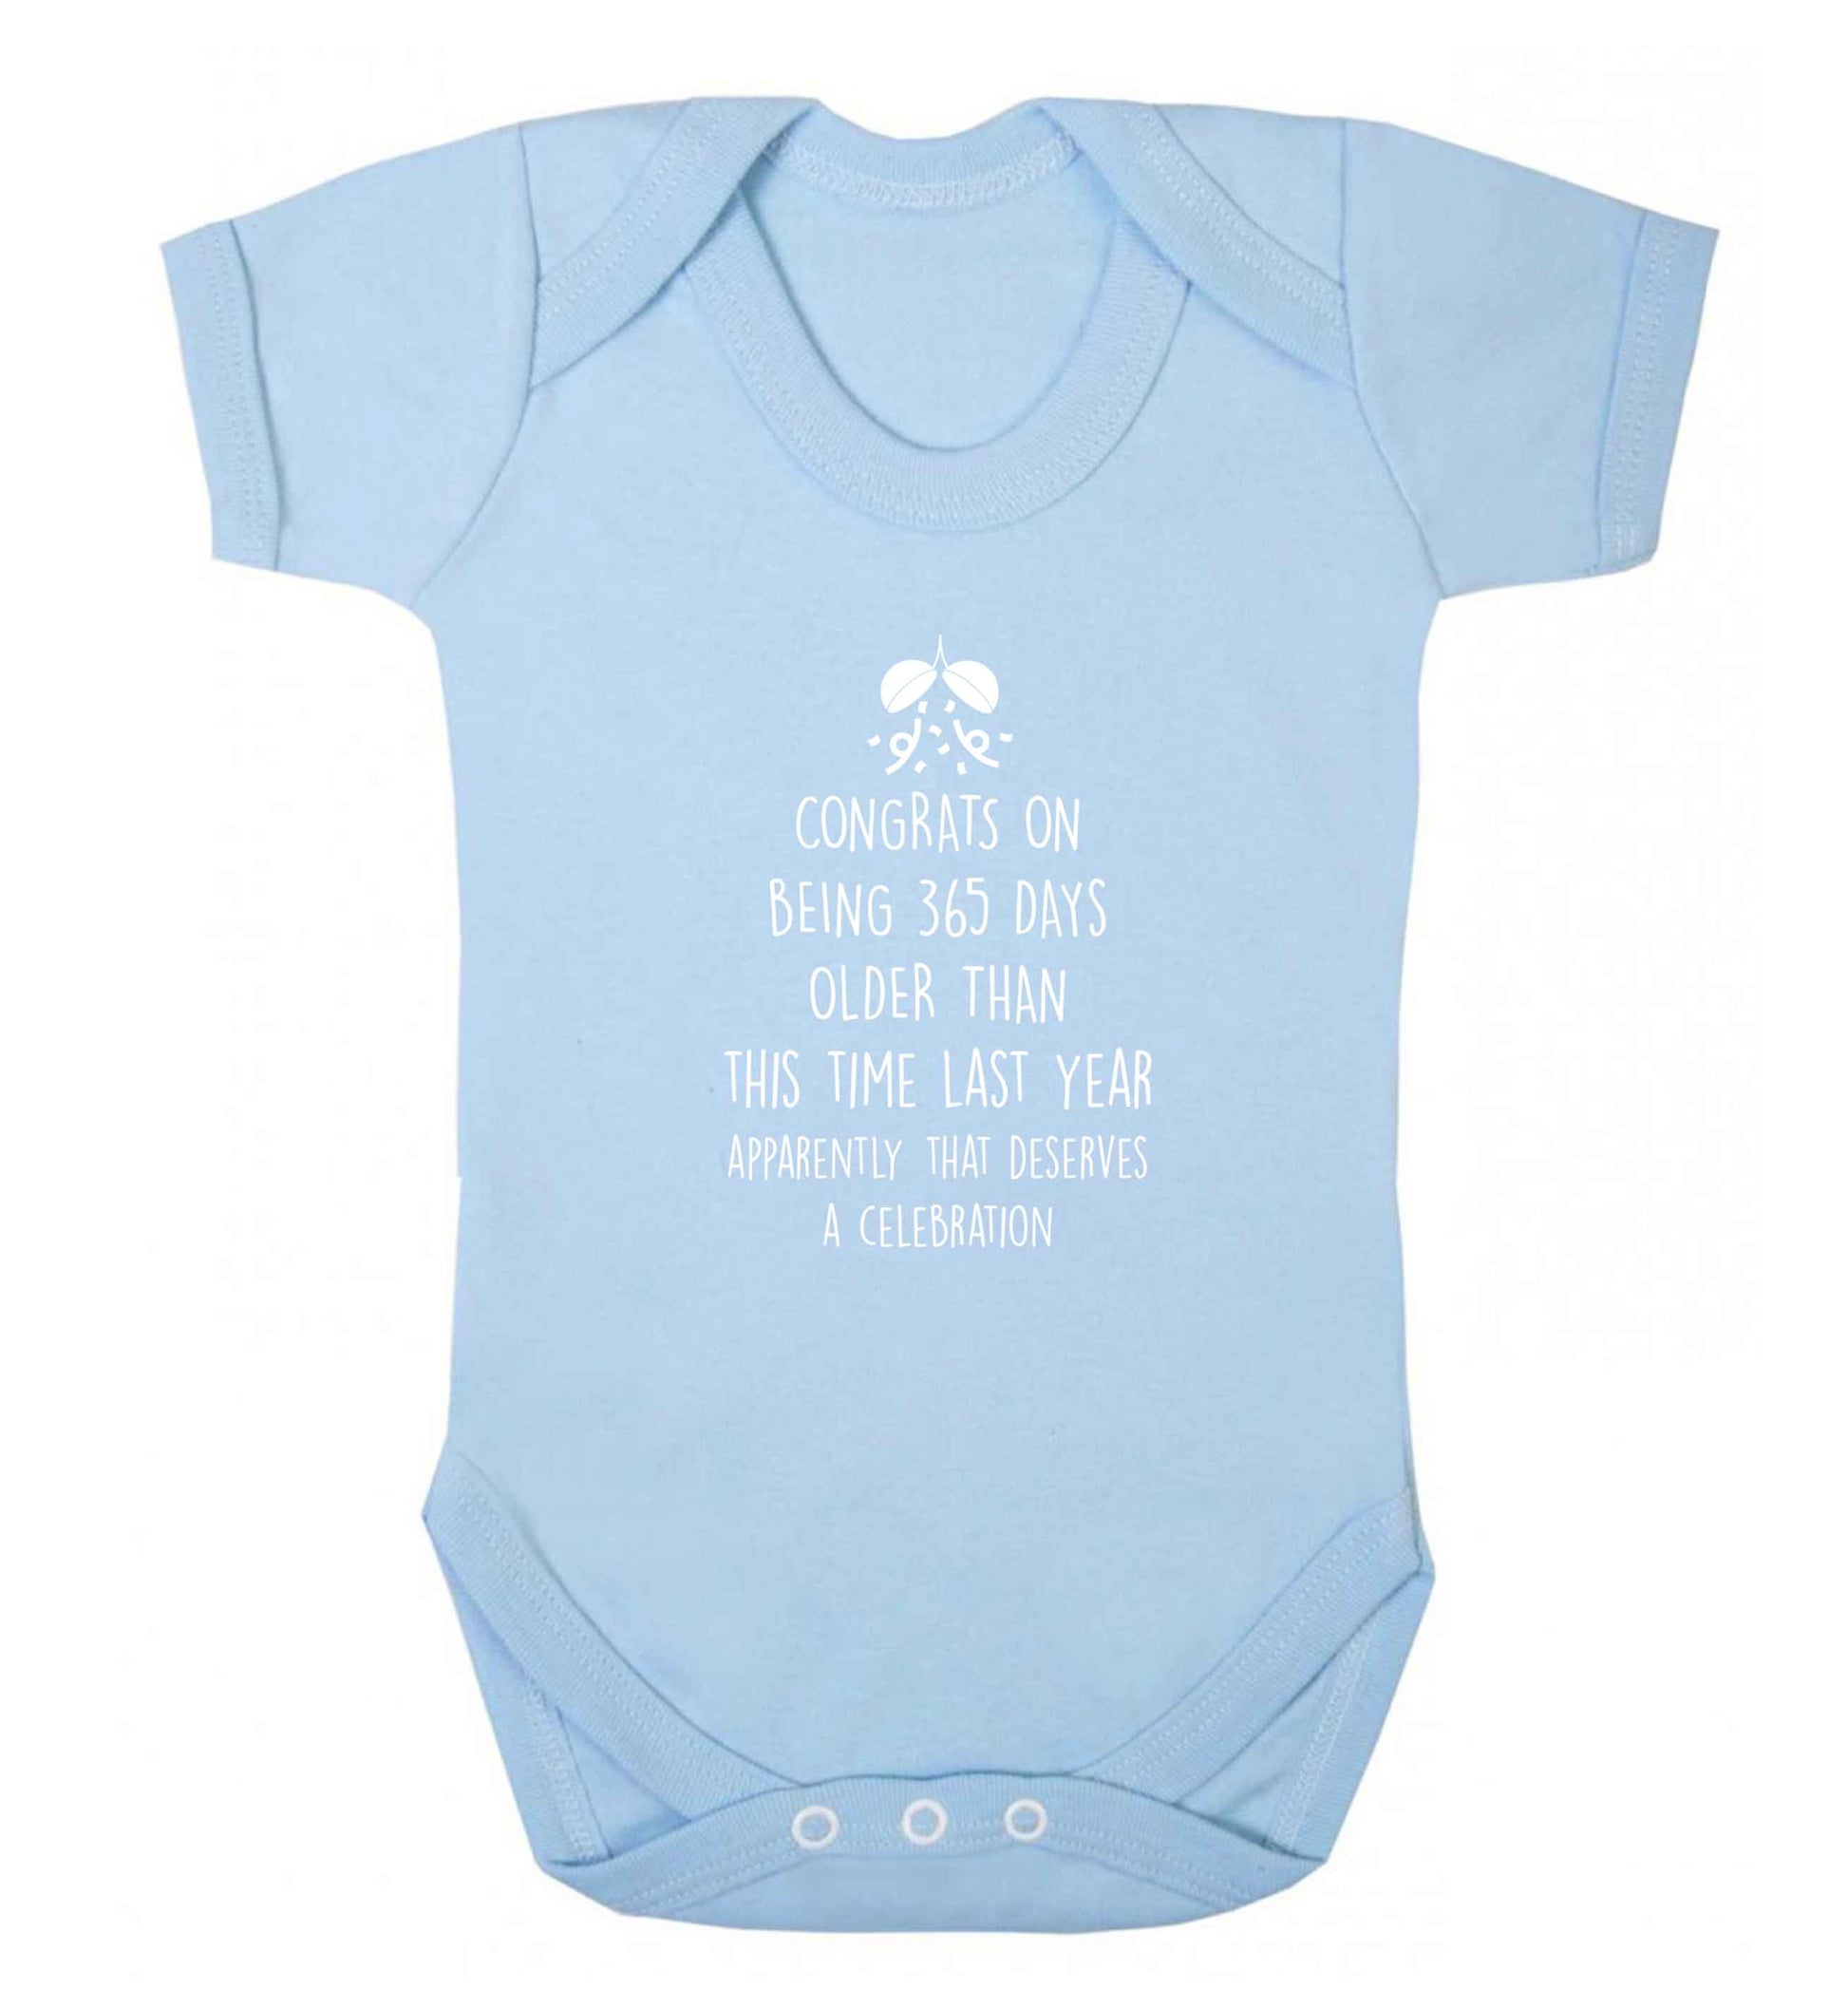 Congrats on being 365 days older than you were this time last year apparently that deserves a celebration baby vest pale blue 18-24 months